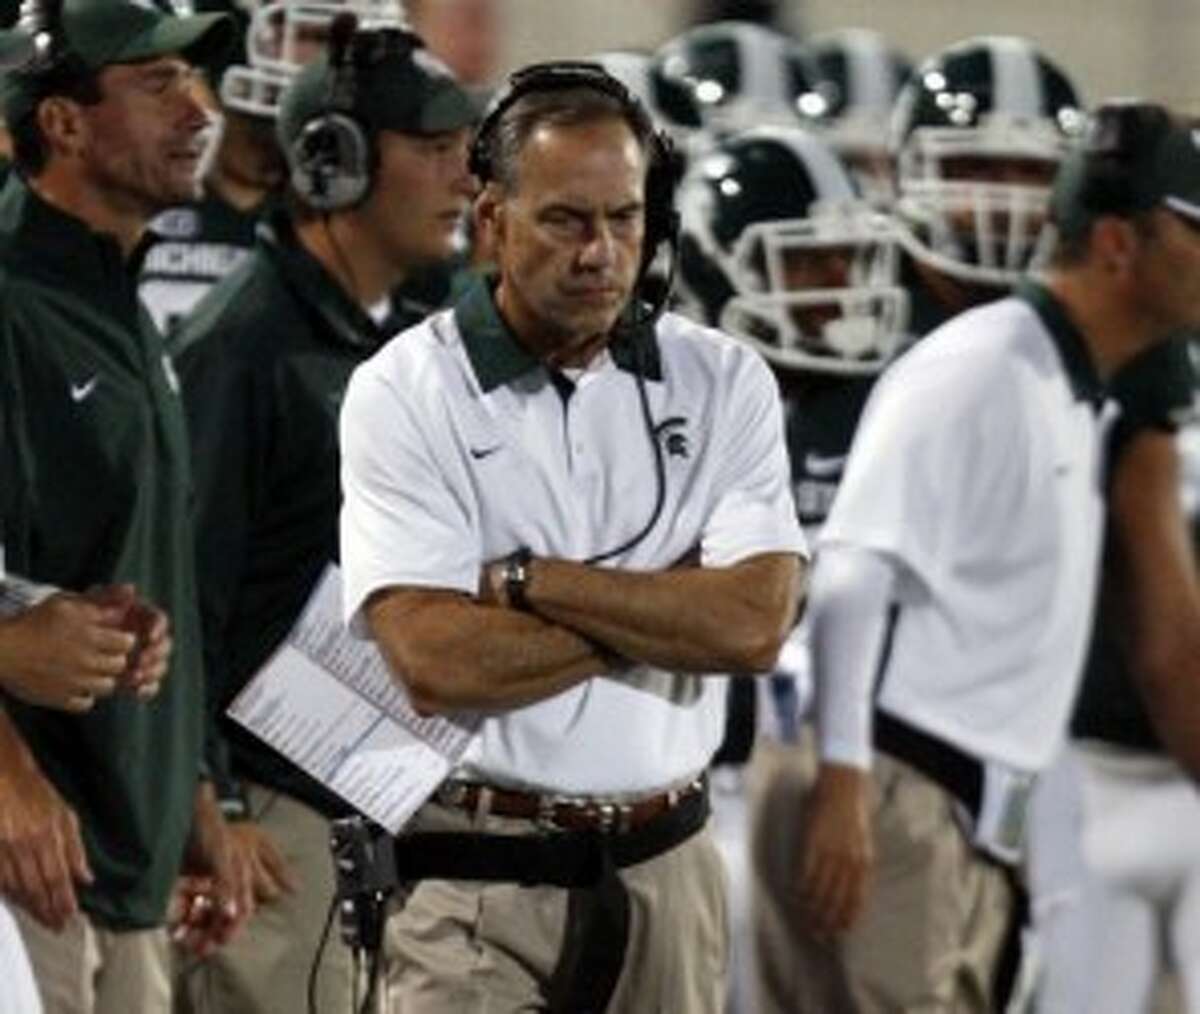 Michigan State coach Mark Dantonio paces on the sidelines during Saturday’s loss to Notre Dame. (Kirthmon F. Dozier/Detroit Free Press/MCT)